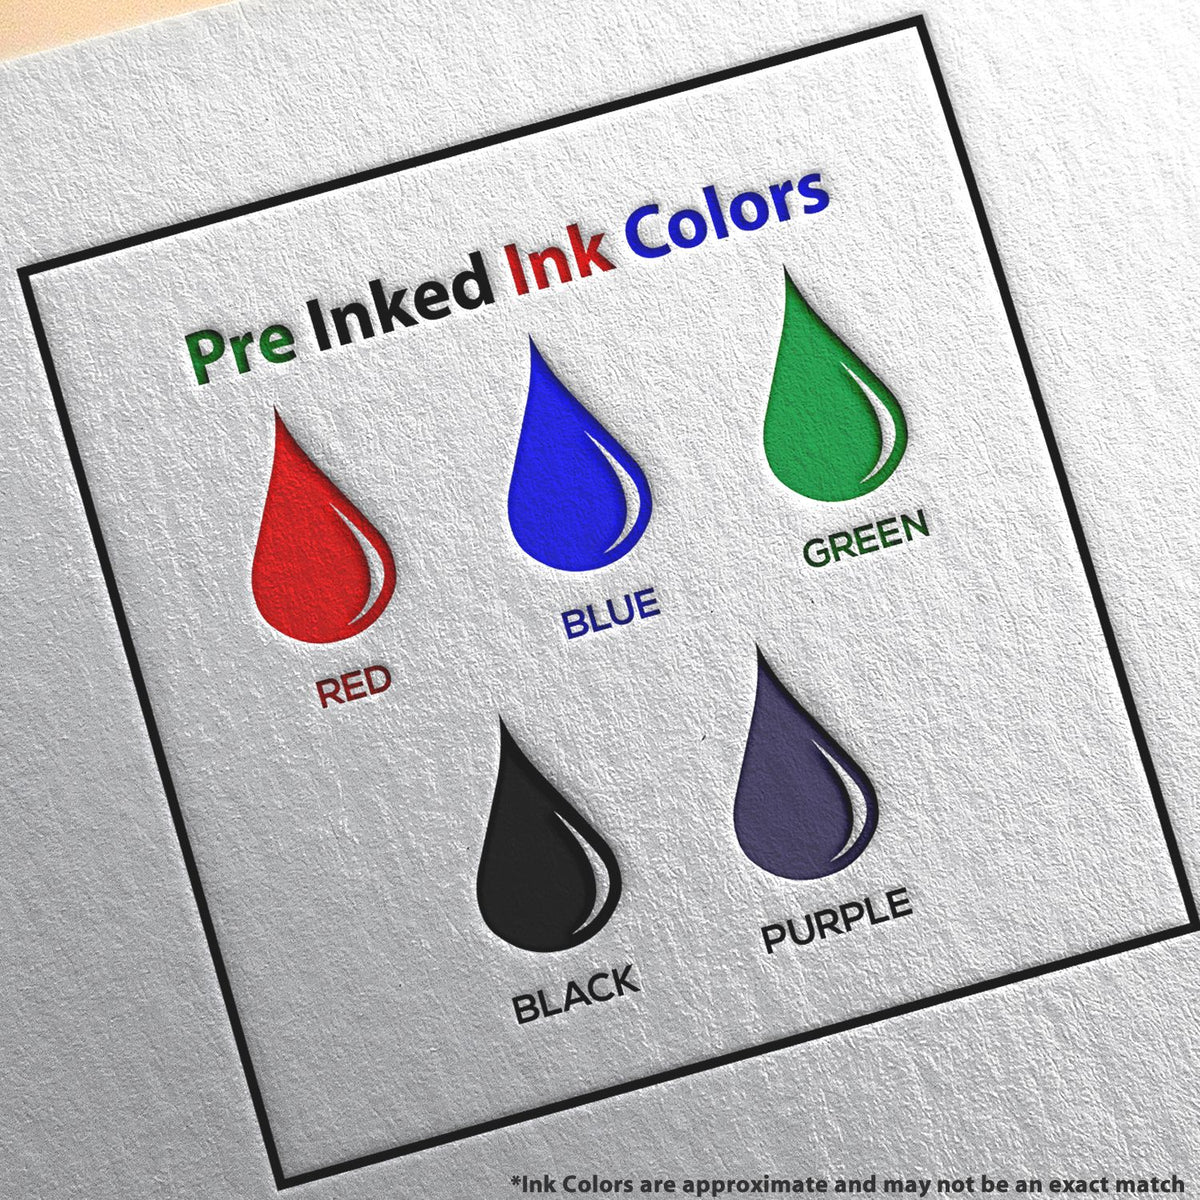 A picture showing the different ink colors or hues available for the Premium MaxLight Pre-Inked South Carolina Geology Stamp